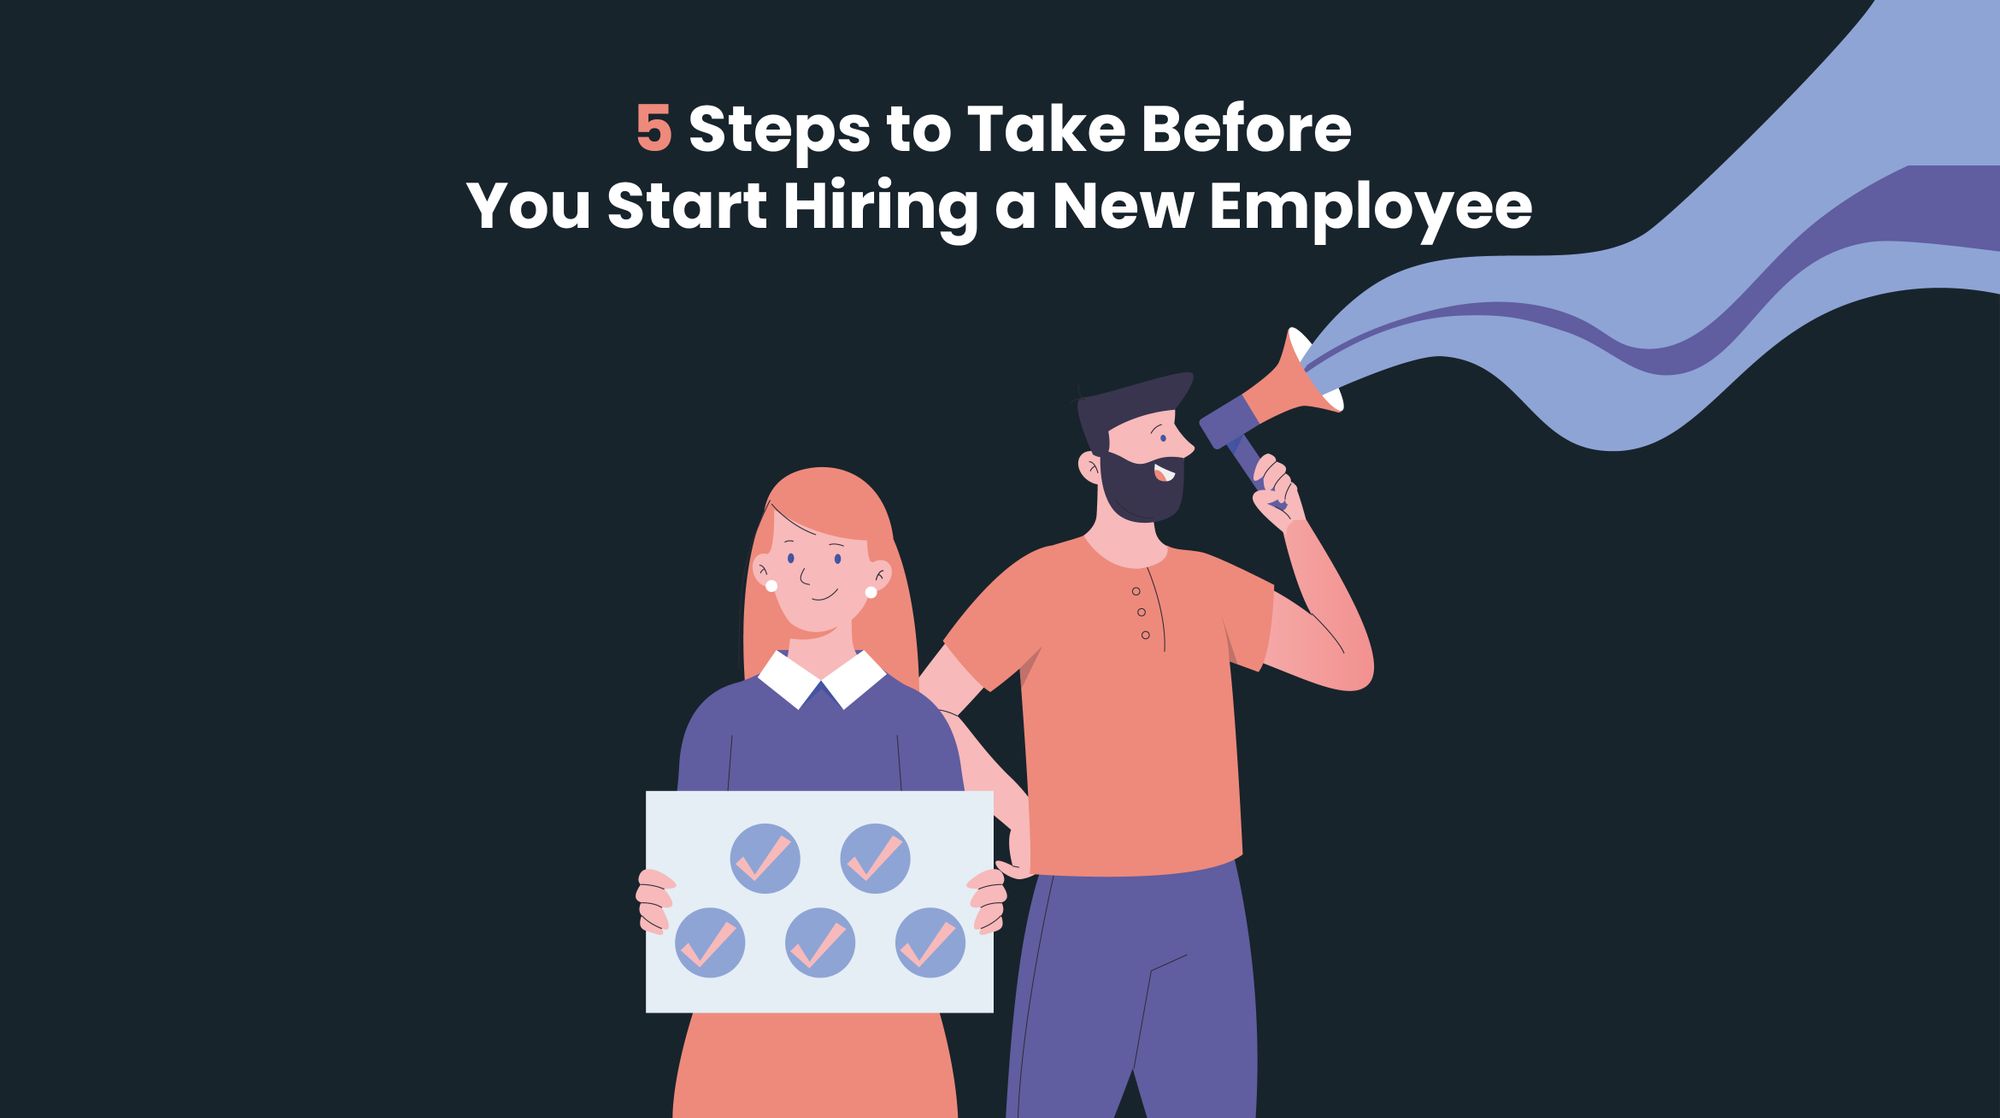 5 Steps to Take Before You Start Hiring a New Employee